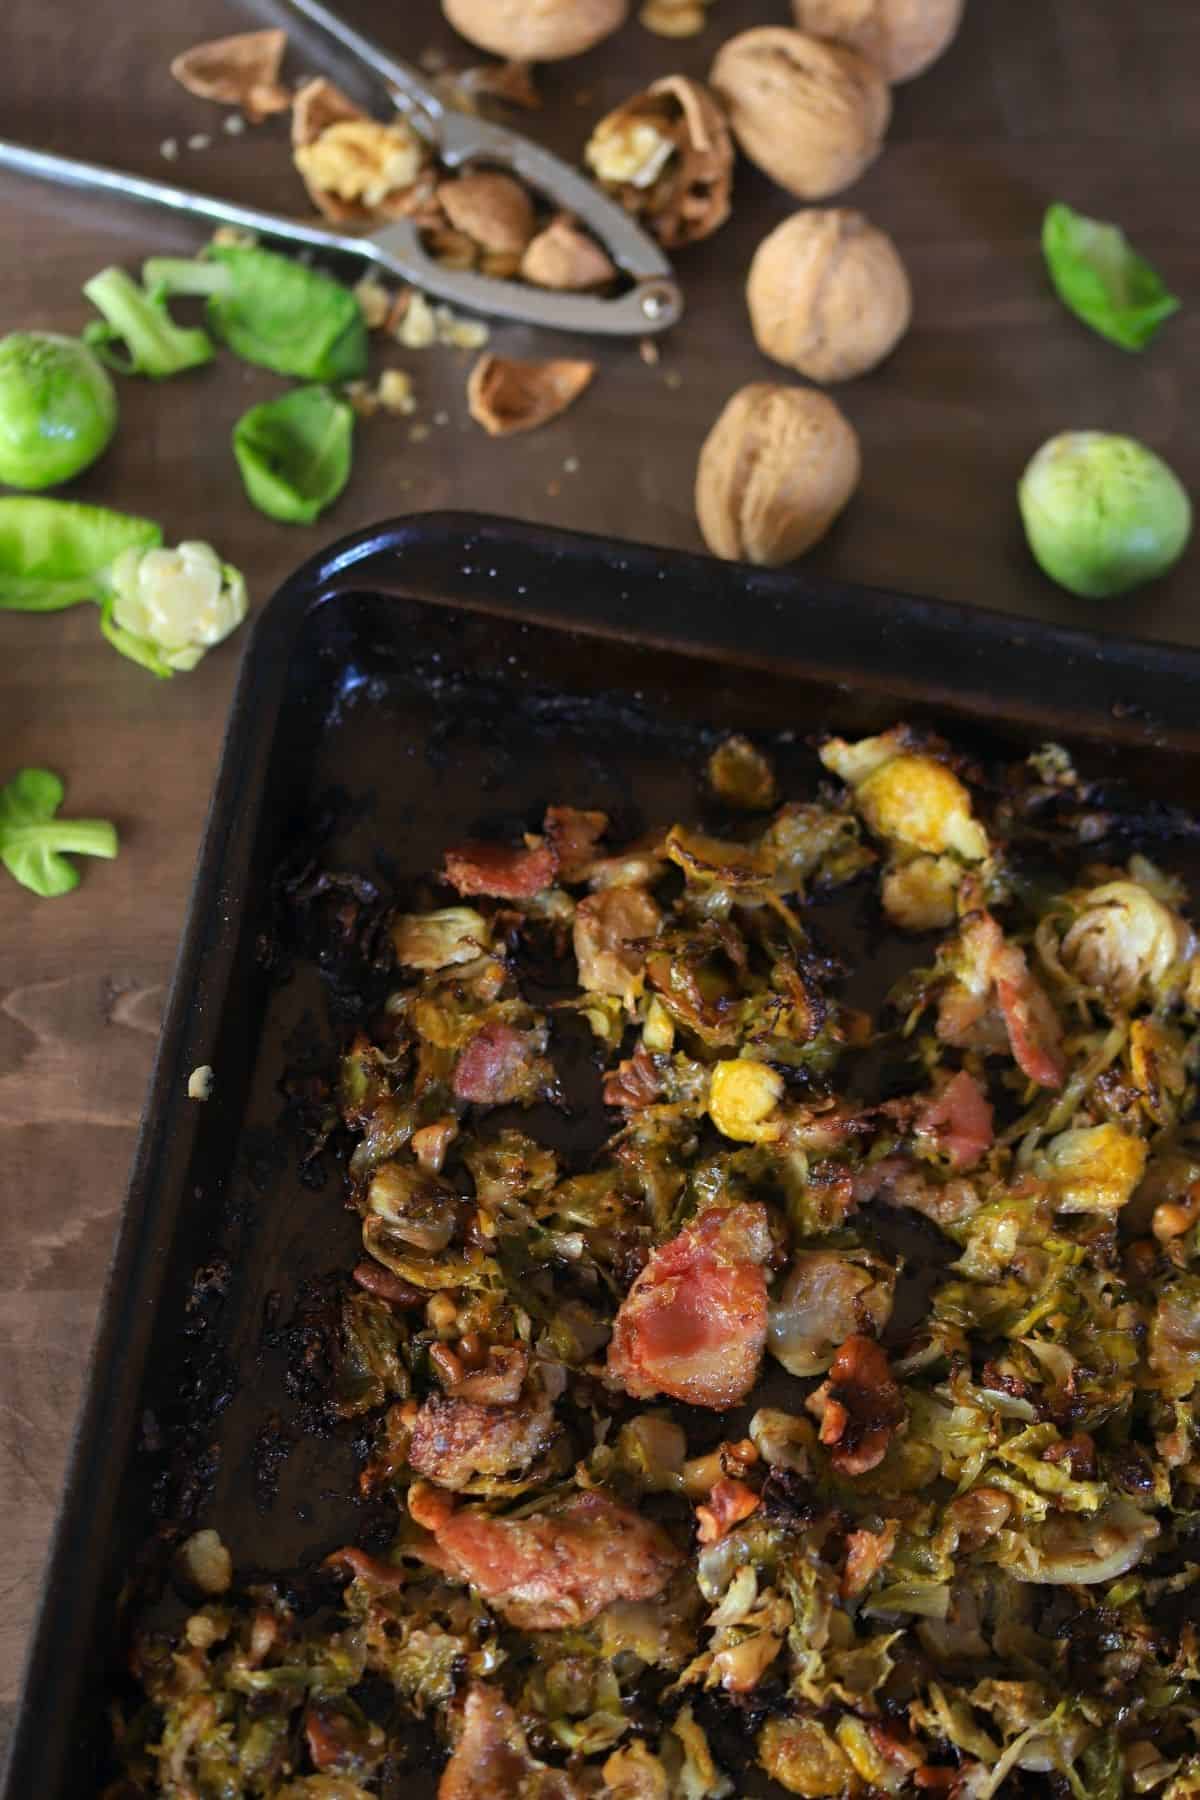 baked brussel sprouts on a baking sheet next to cracked walnuts with nutcracker and some brussel sprout leaves